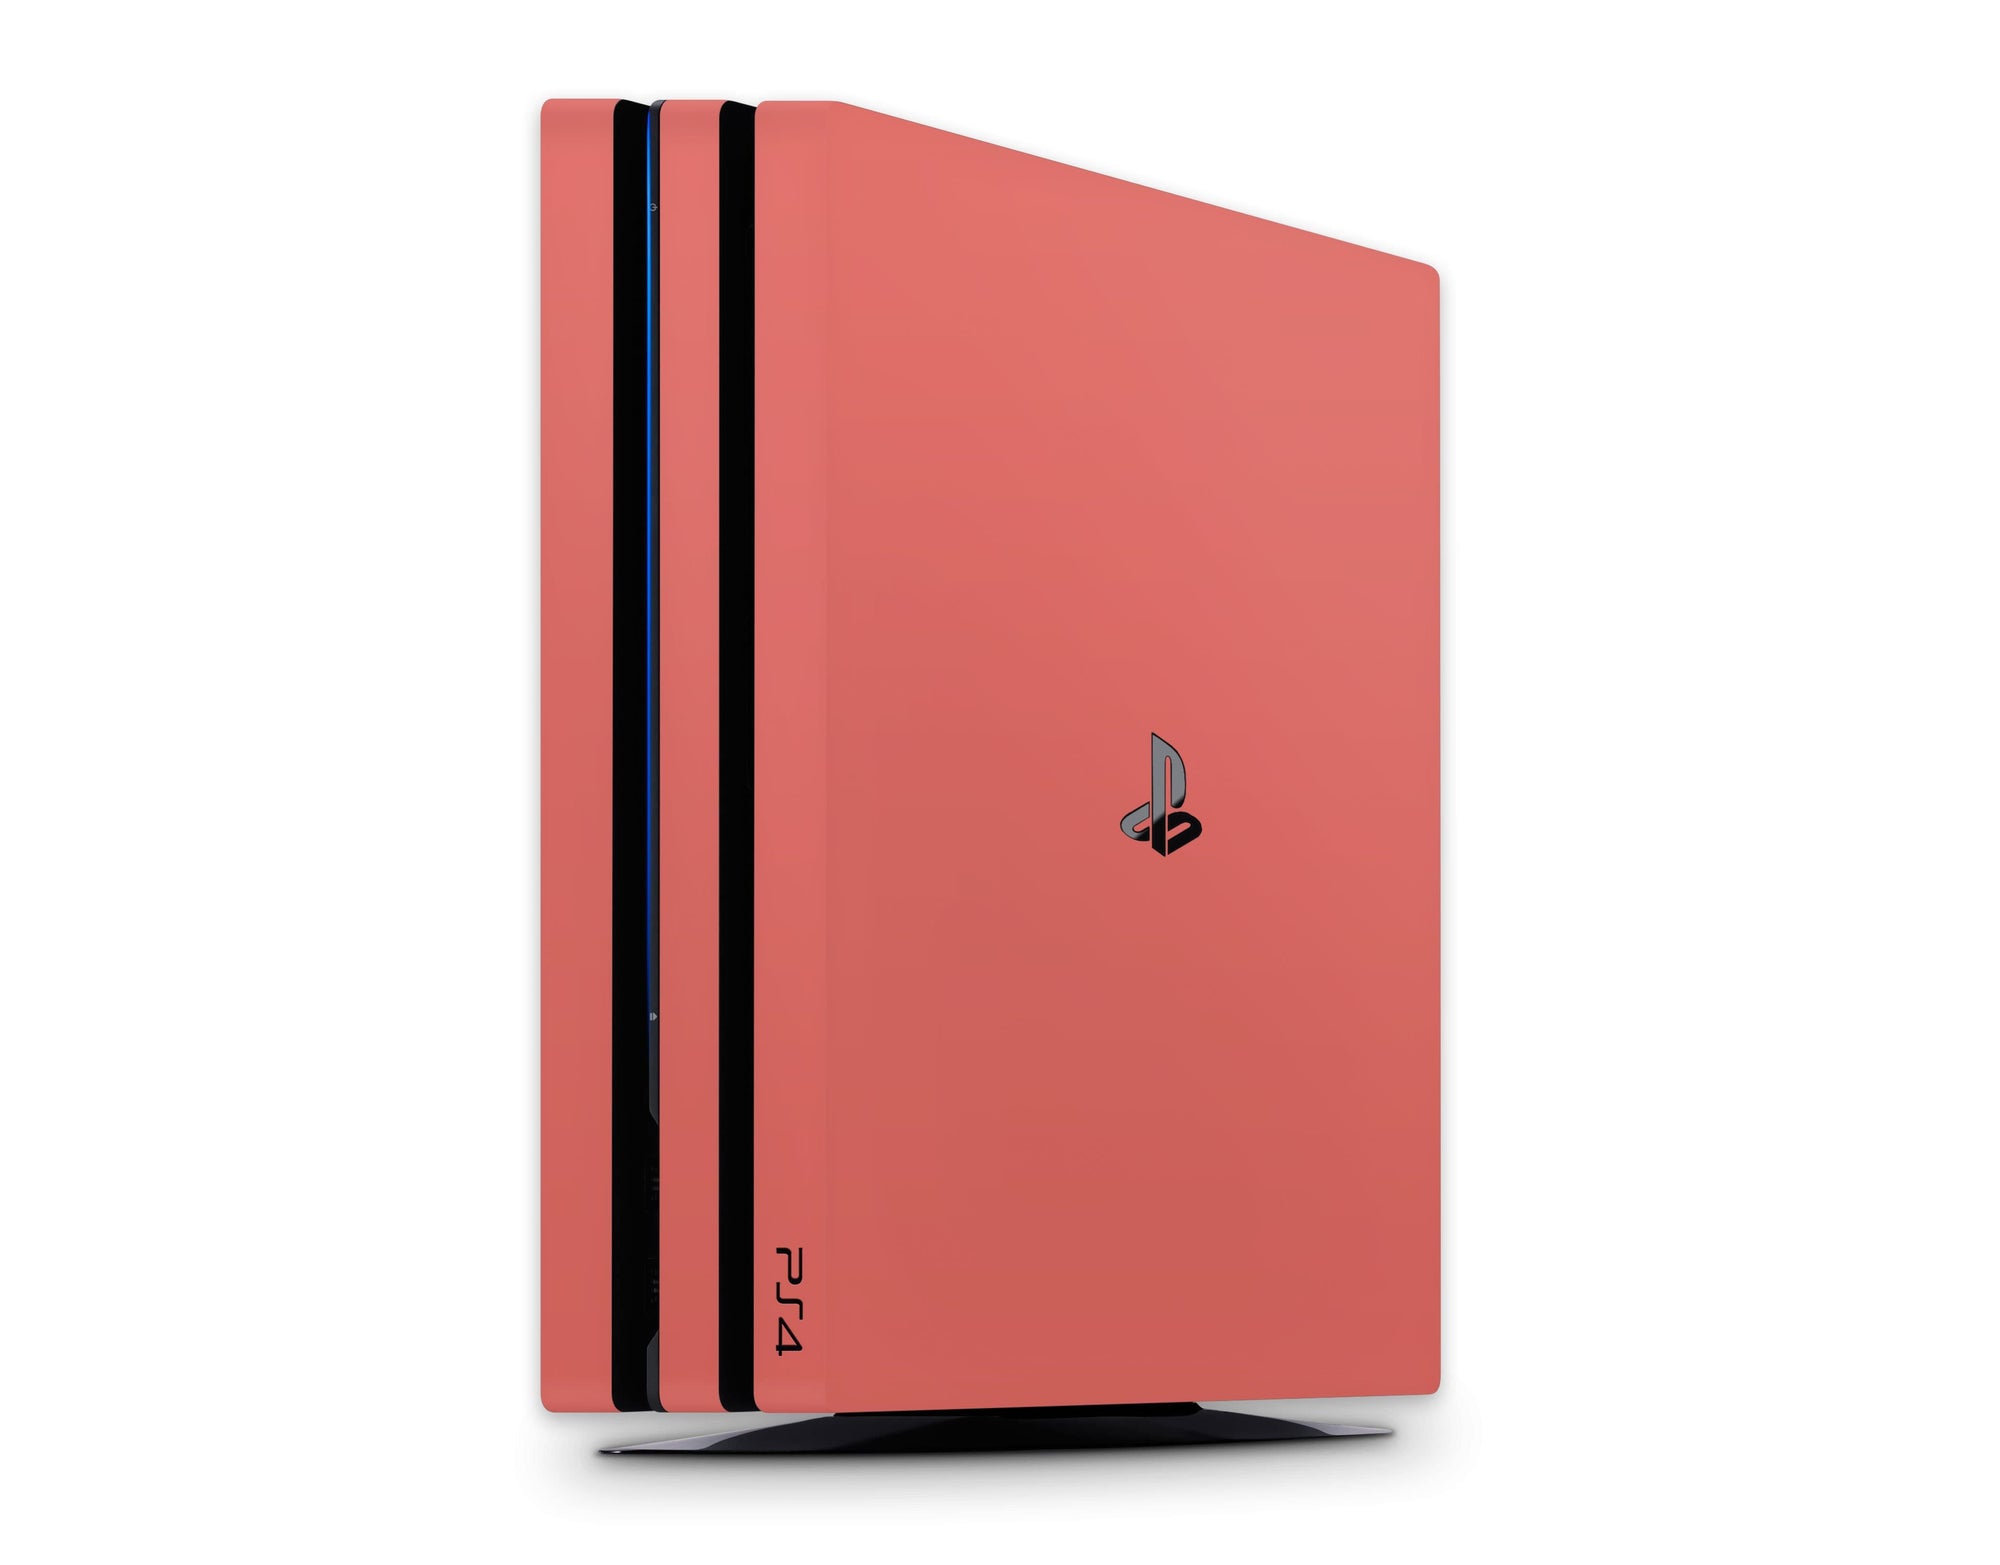 Classic Solid Color PS4 Pro Skin | Choose Your Color - StickyBunny